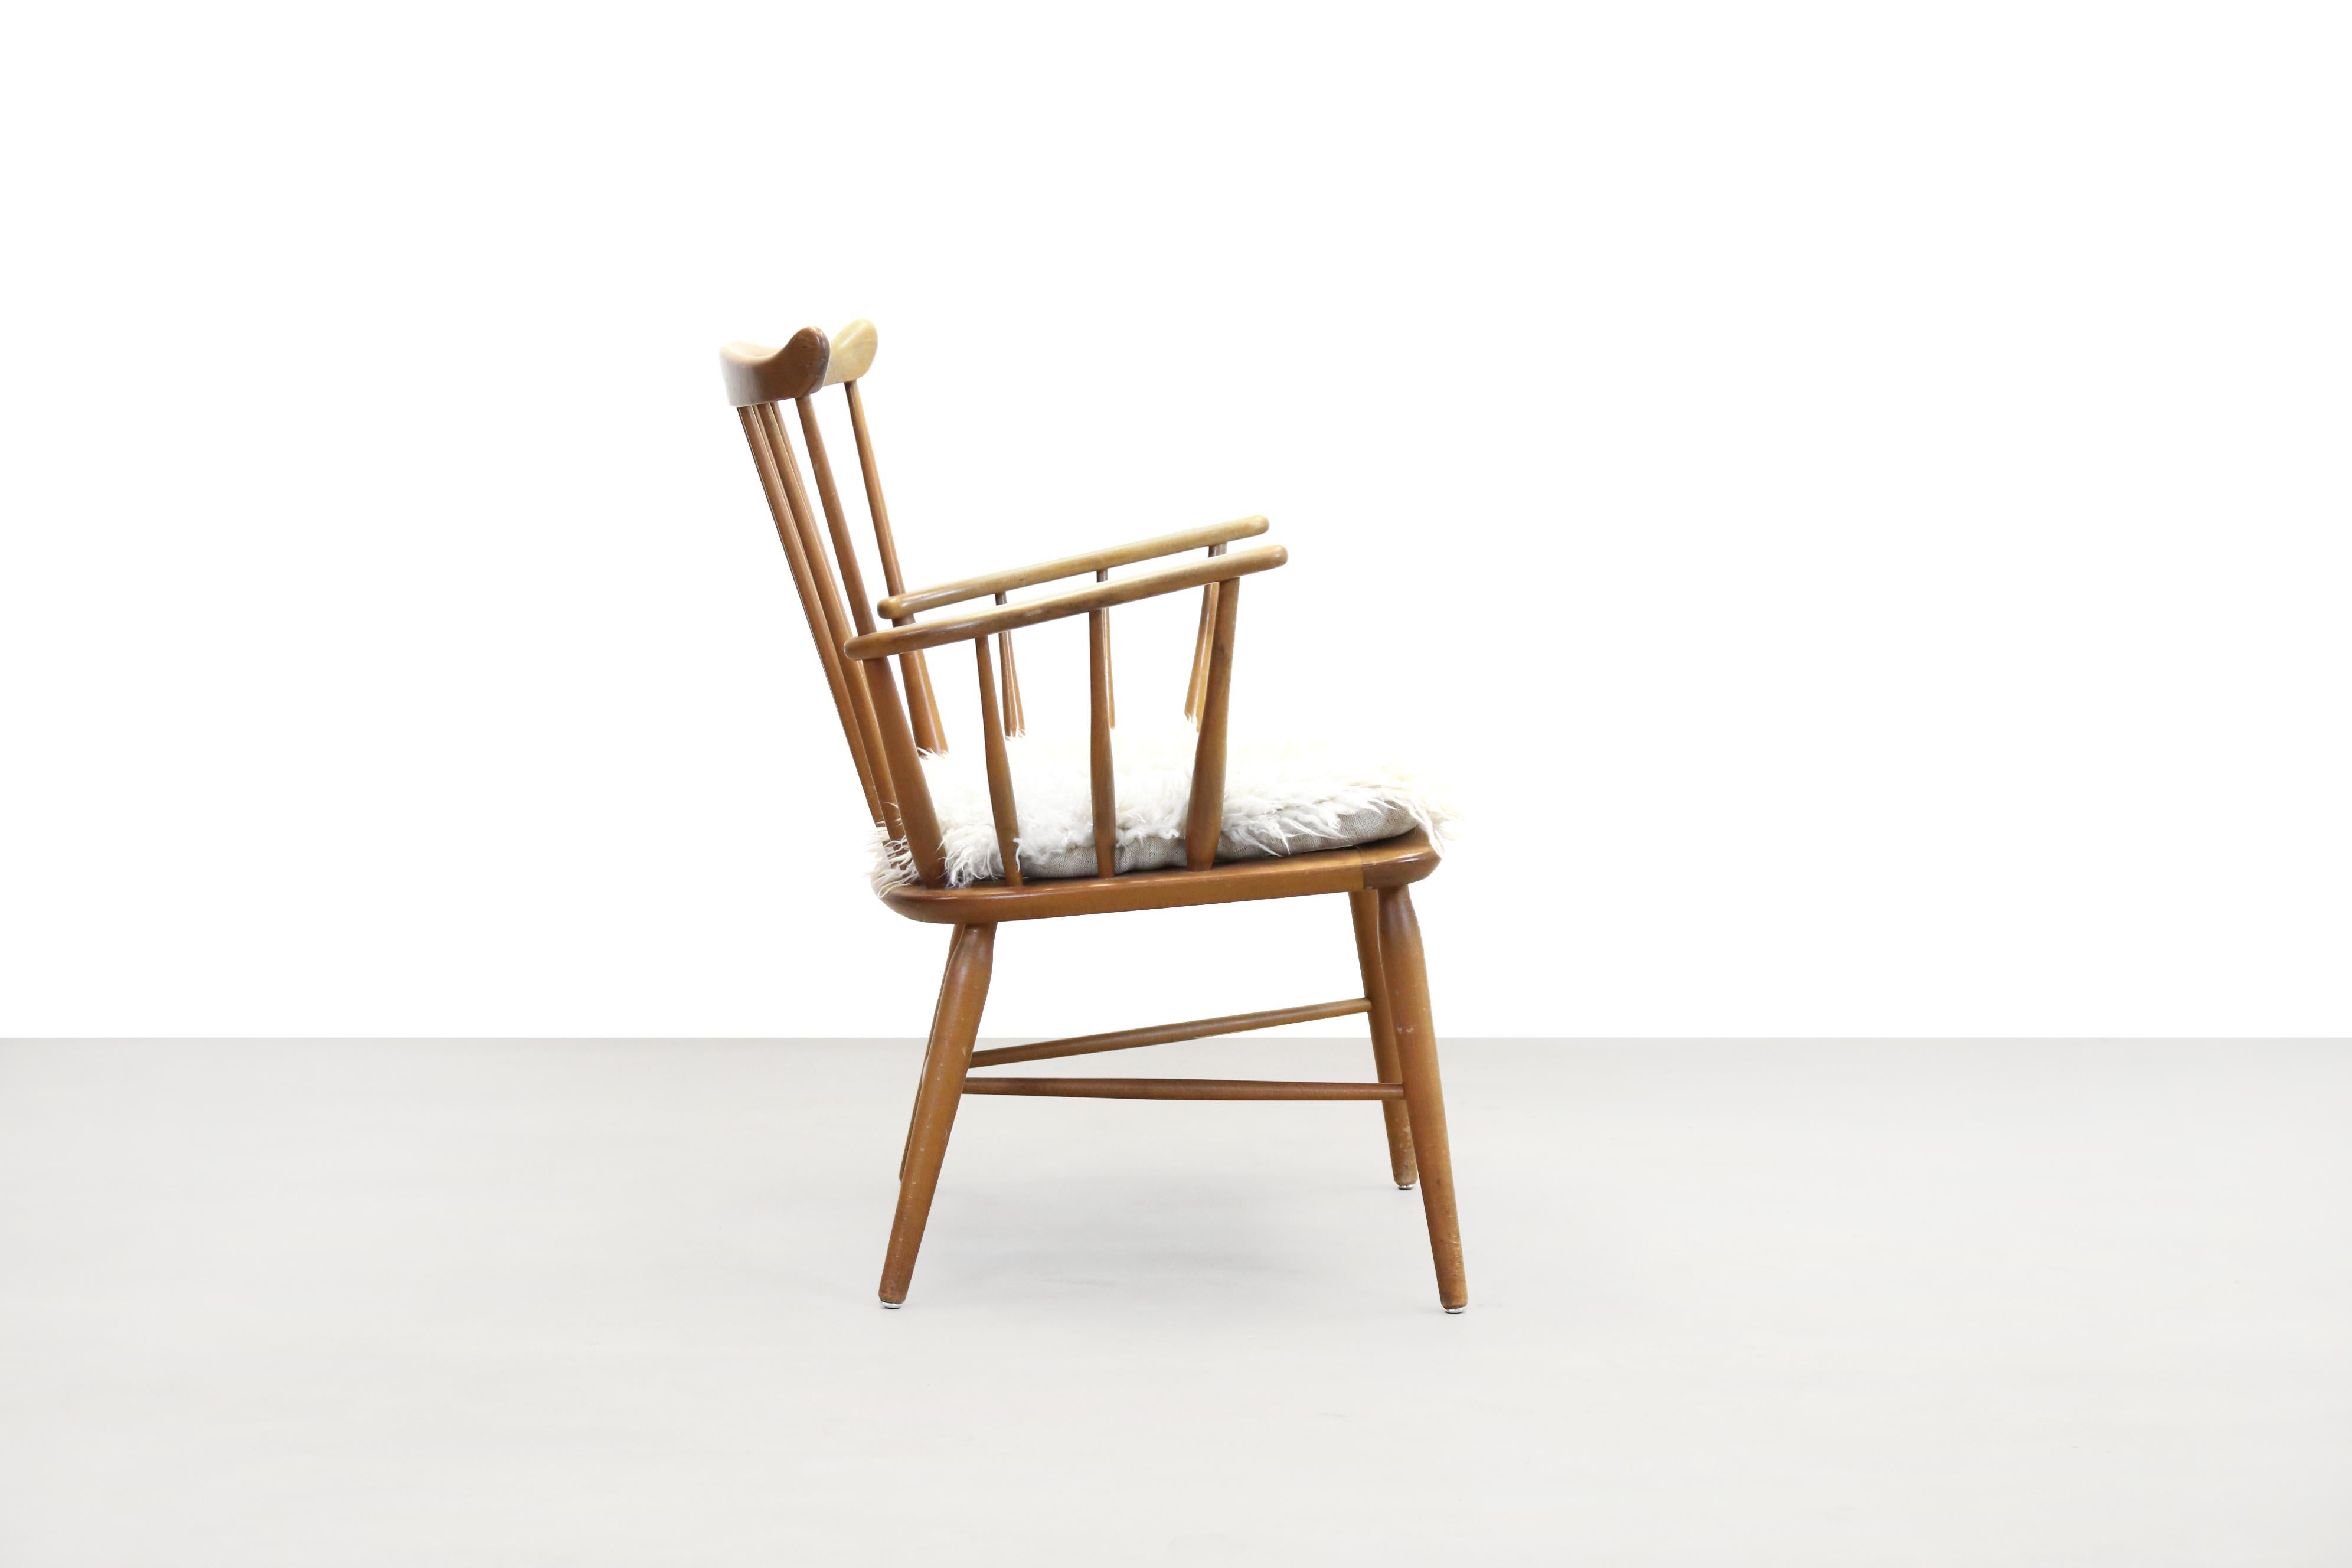 Beautiful beechwood design armchair designed by Borge Mogensen and produced by FDB Mobler, in Denmark in the 1960s. The famous designer from Denmark is known for his sustainable and sober shaker style furniture. Today, Mogensen's furniture is so